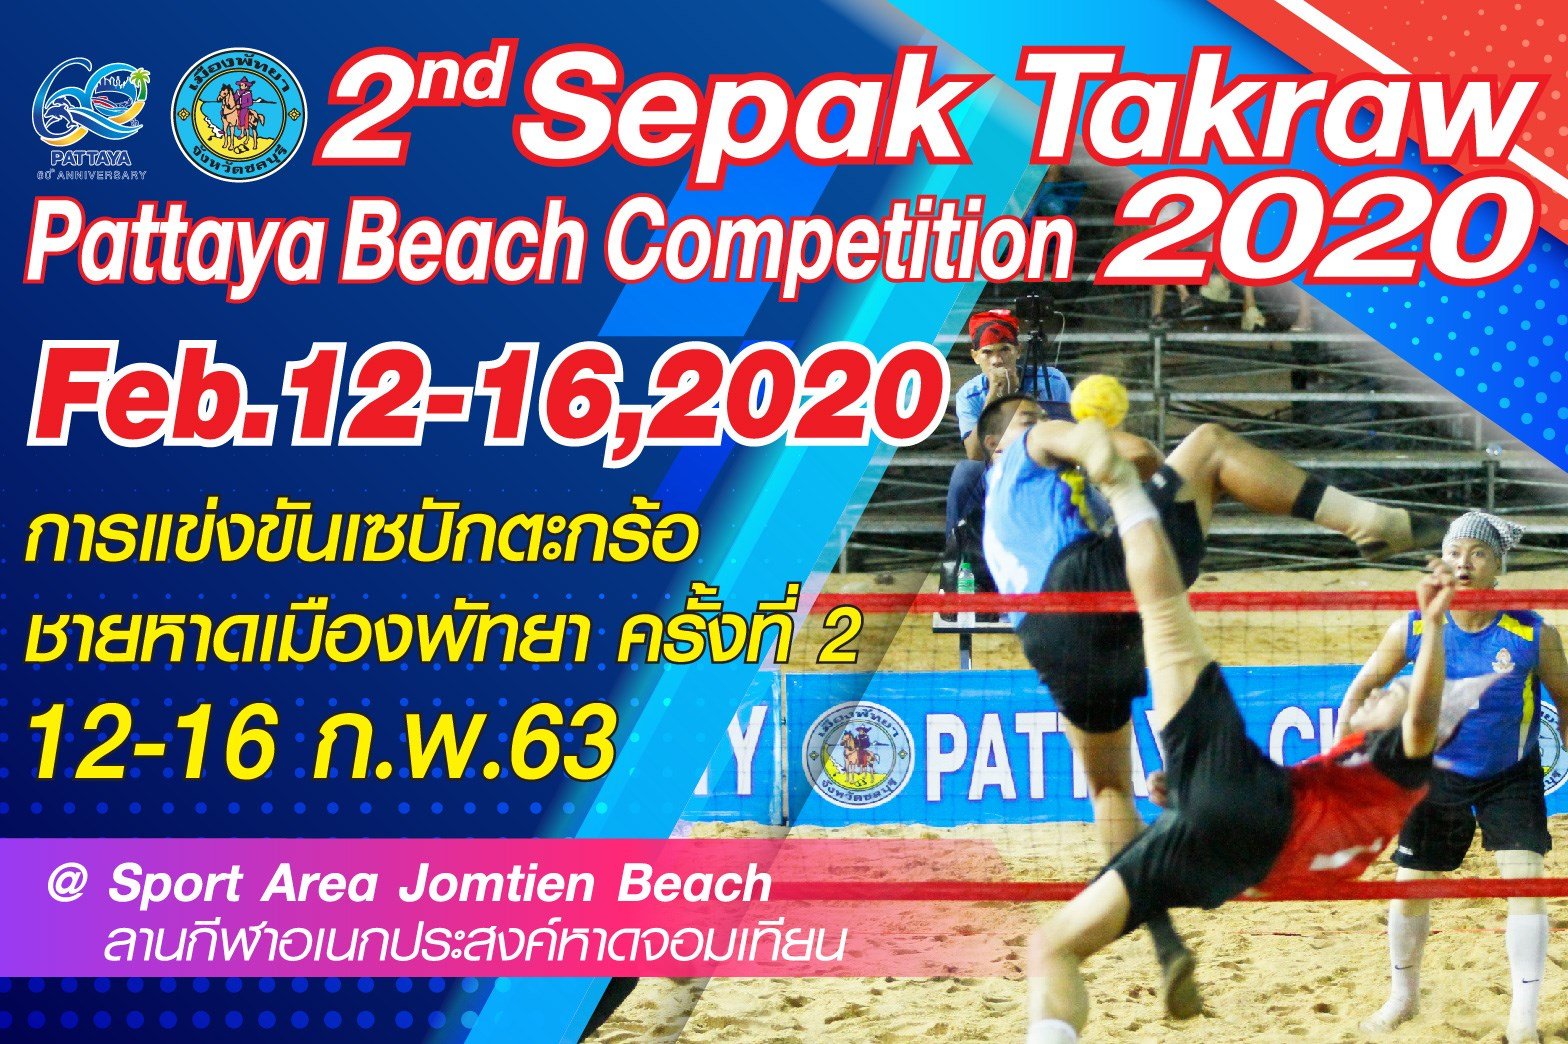 Seapak Takraw Competition